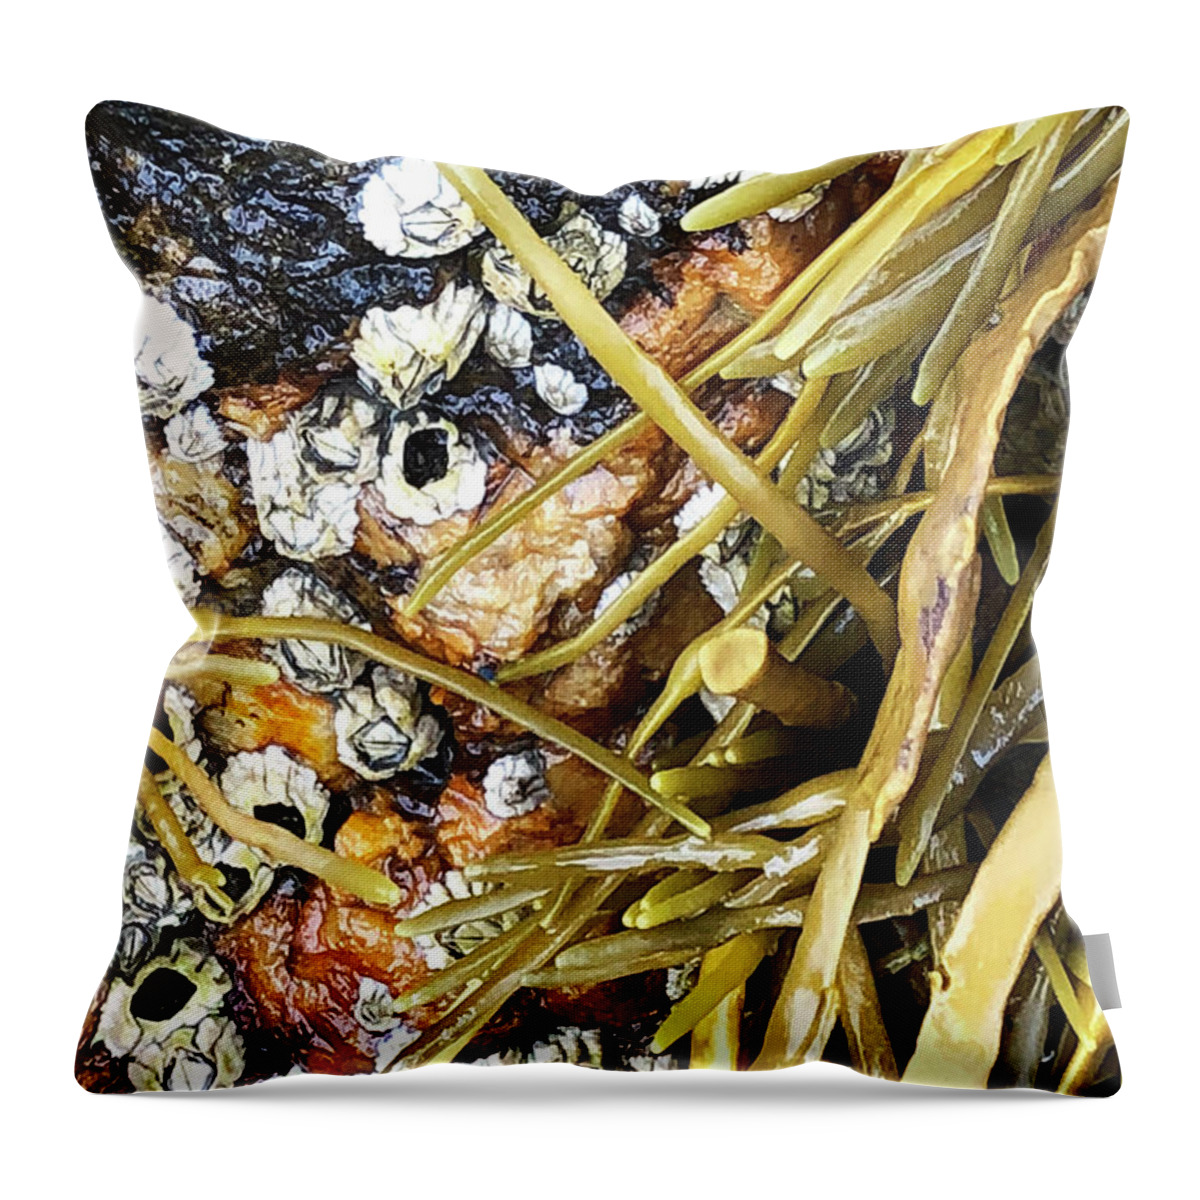 Ocean Throw Pillow featuring the digital art Barnacles and Weed by Nancy Olivia Hoffmann